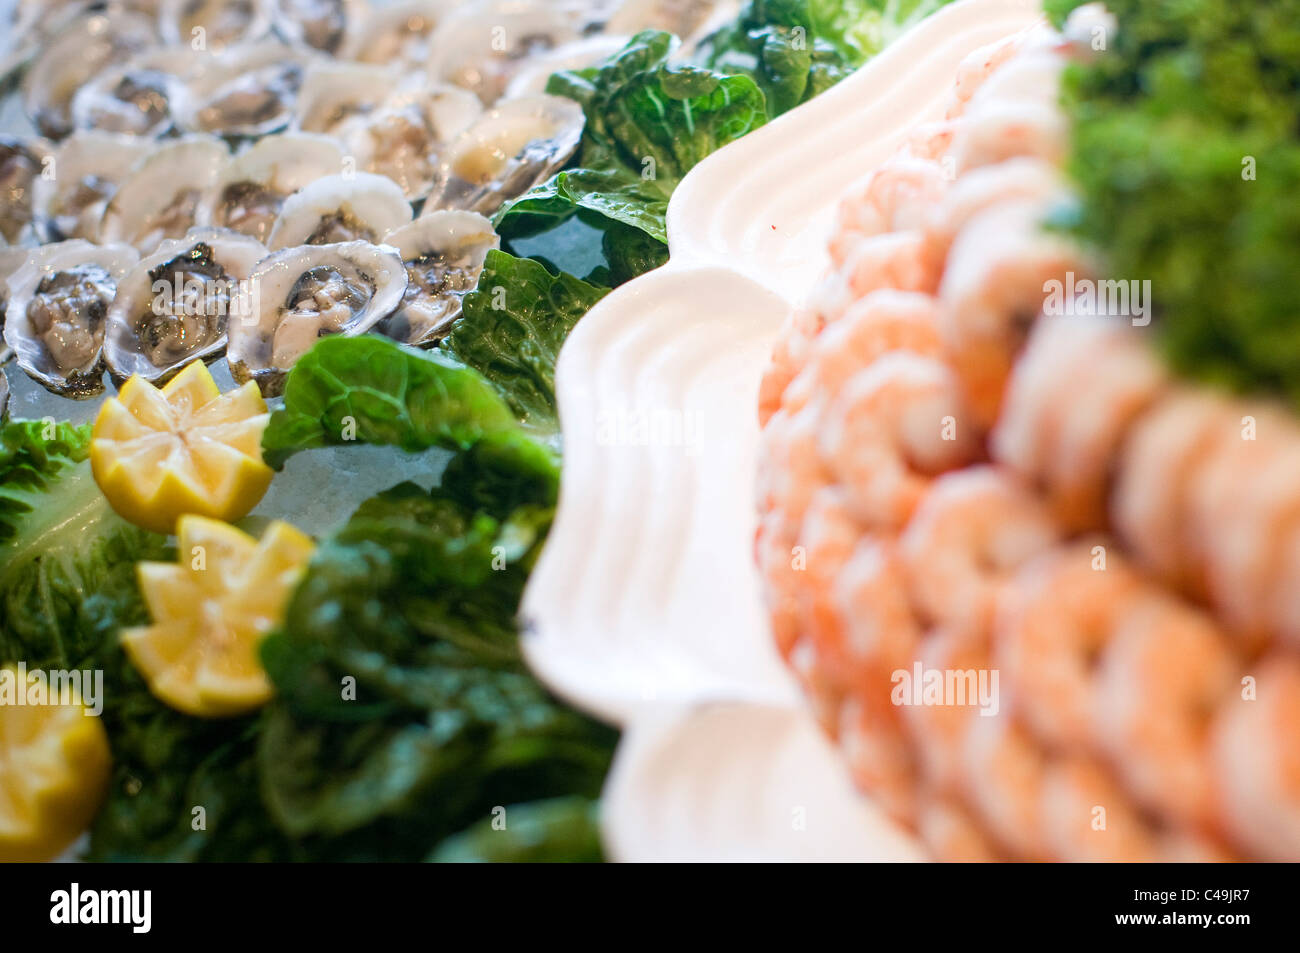 A shrimp platter and raw oyster display. Stock Photo